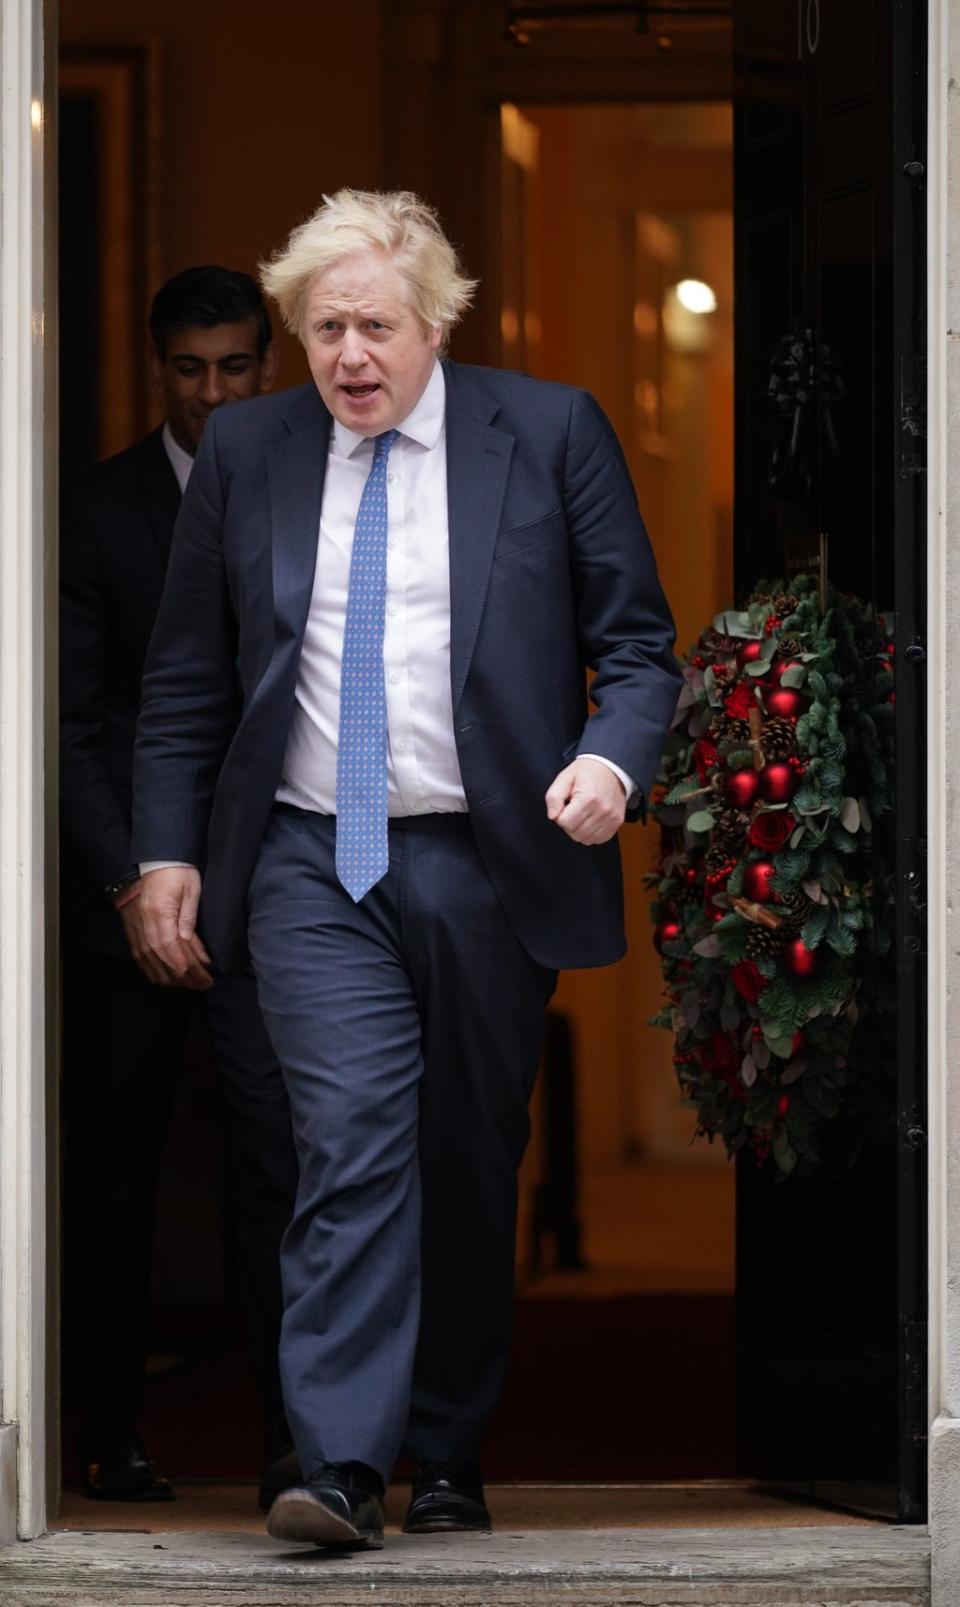 Prime Minister Boris Johnson insisted the guidance was followed (Yui Mok/PA) (PA Wire)